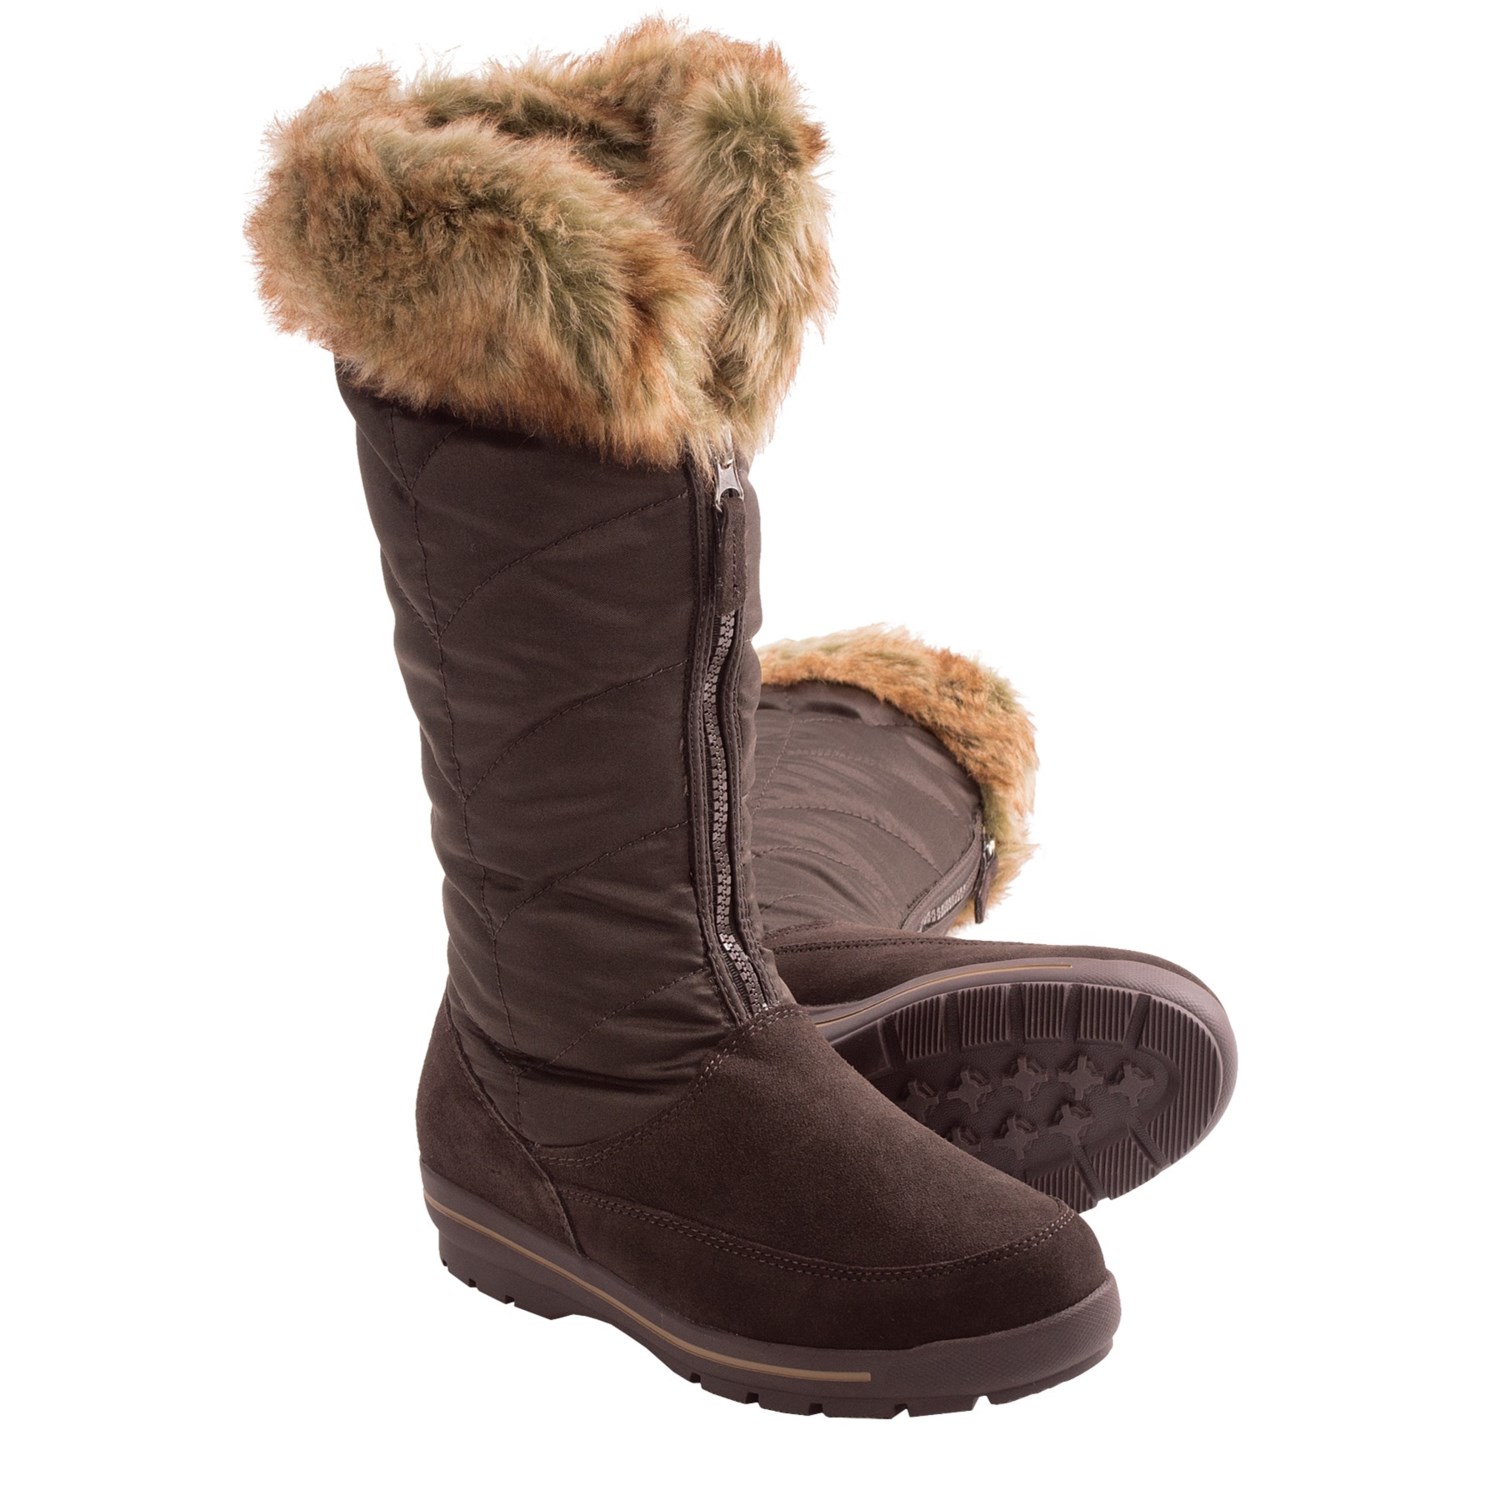 Lands’ End Powder Run Tall Boots - Insulated, Faux-Fur (For Women) in ...